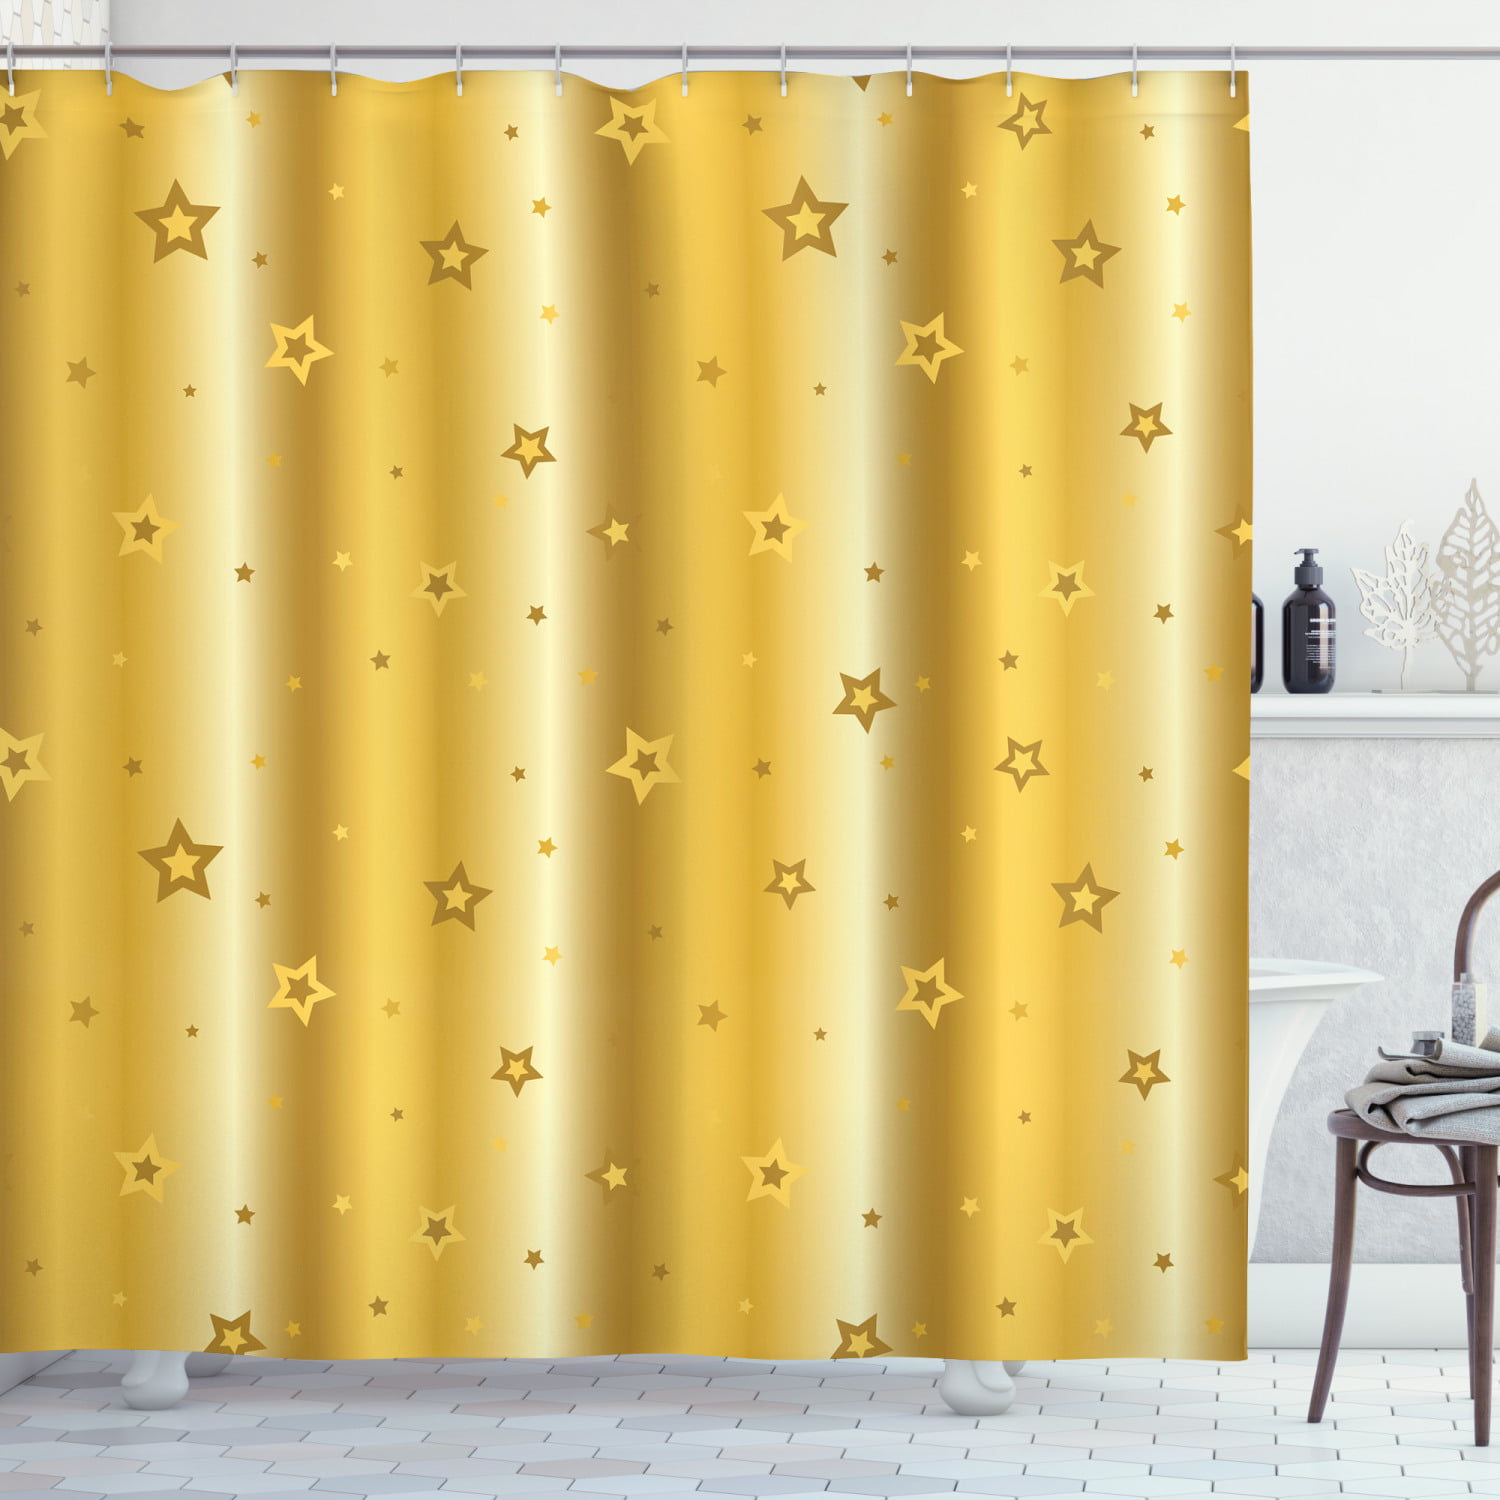 Shower Curtain Antique Gold Door Authentic Moroccan Decor 84 Inches Extra Long 